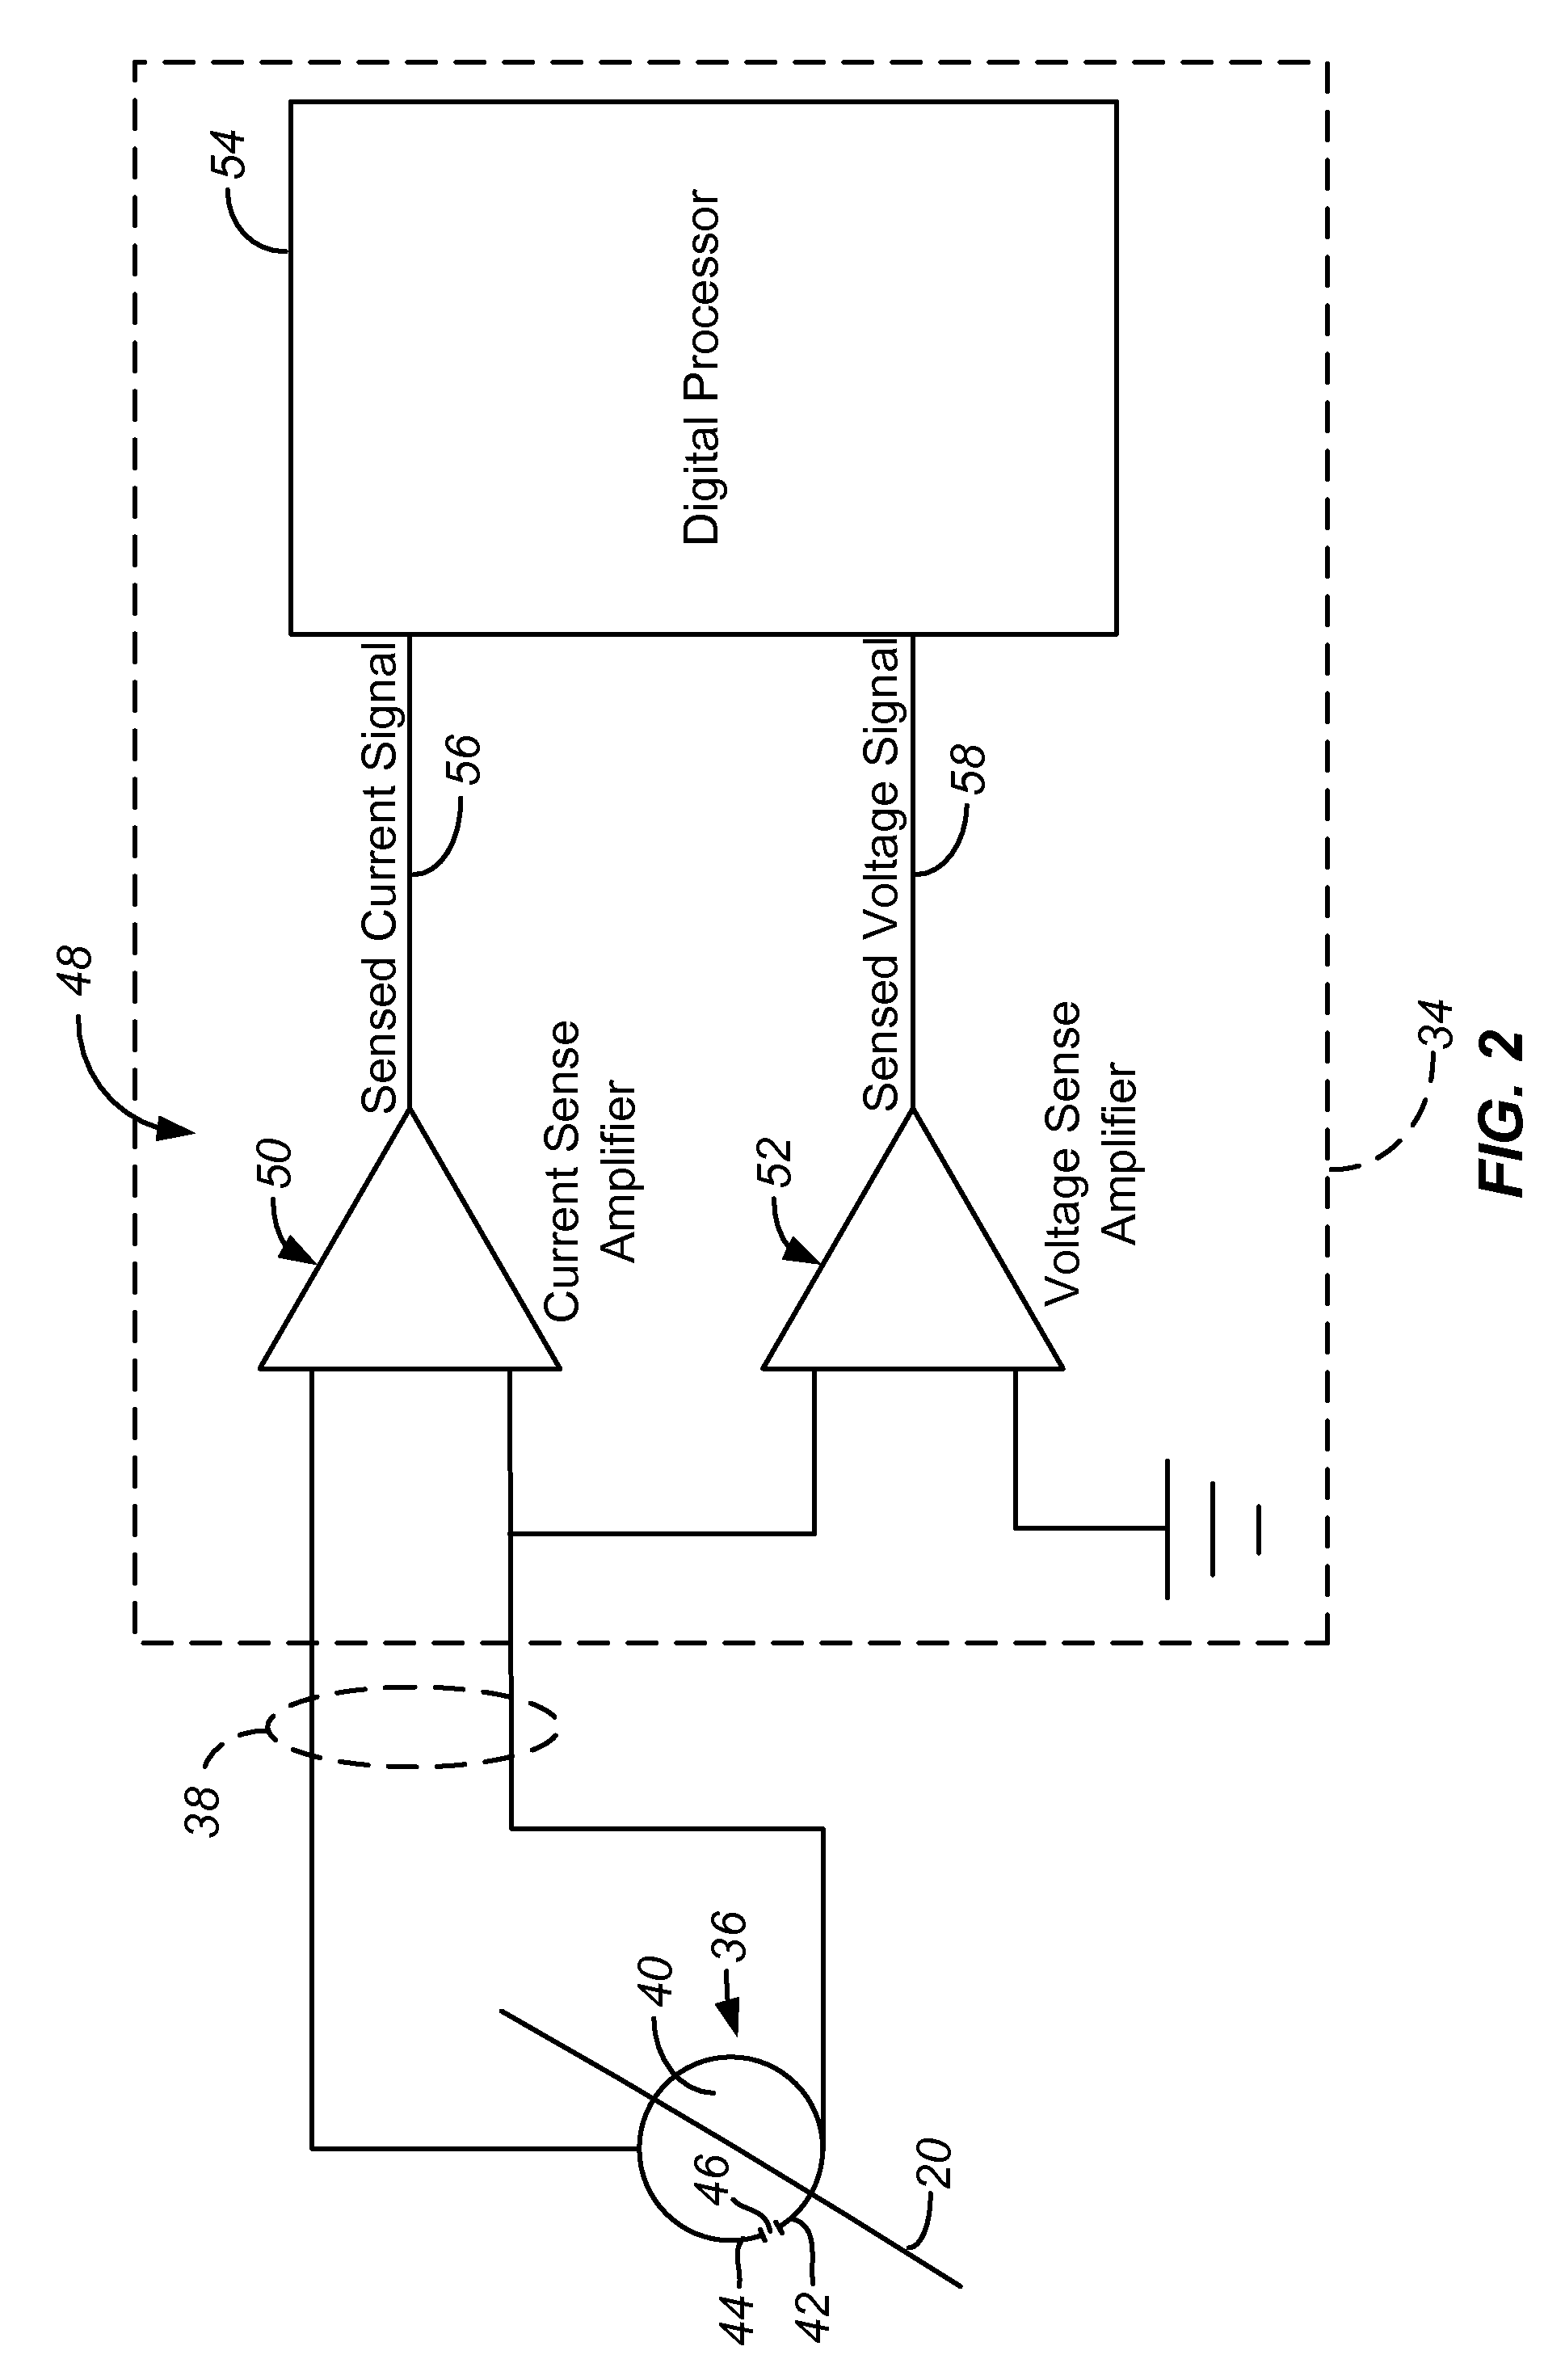 Method for enabling monitoring of power consumption